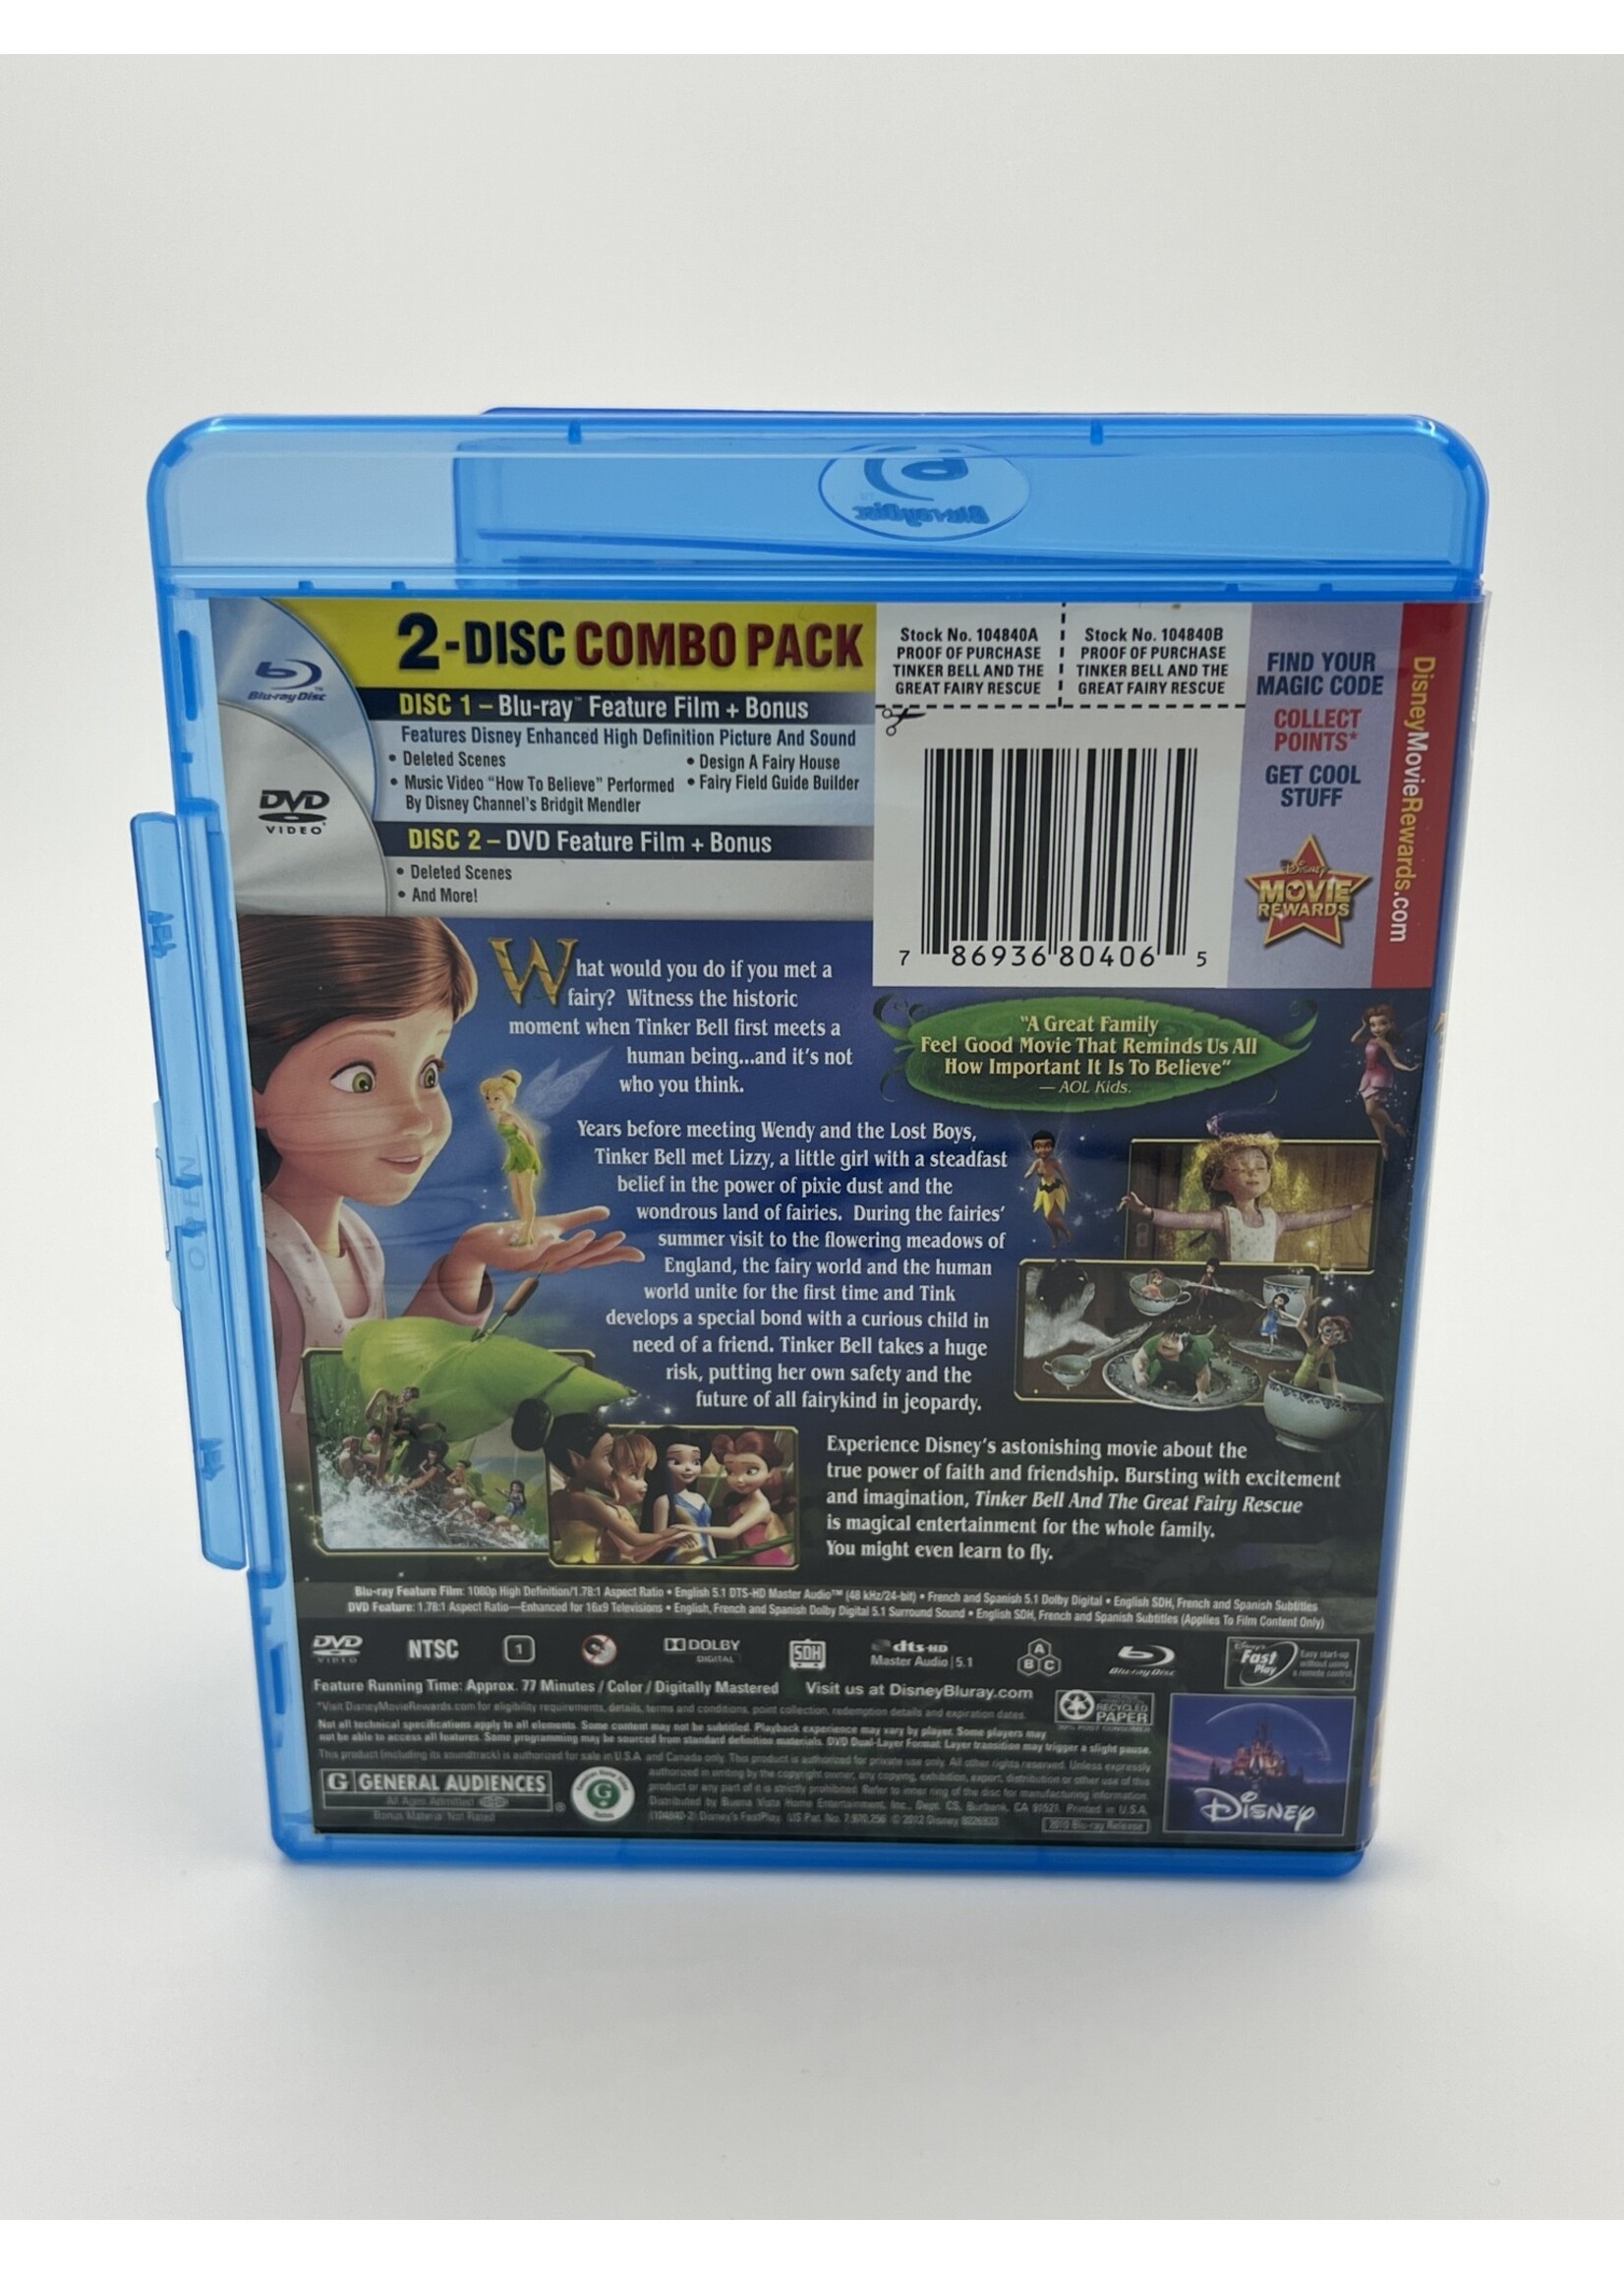 Bluray Disney Tinkerbell And The Great Fairy Rescue Bluray